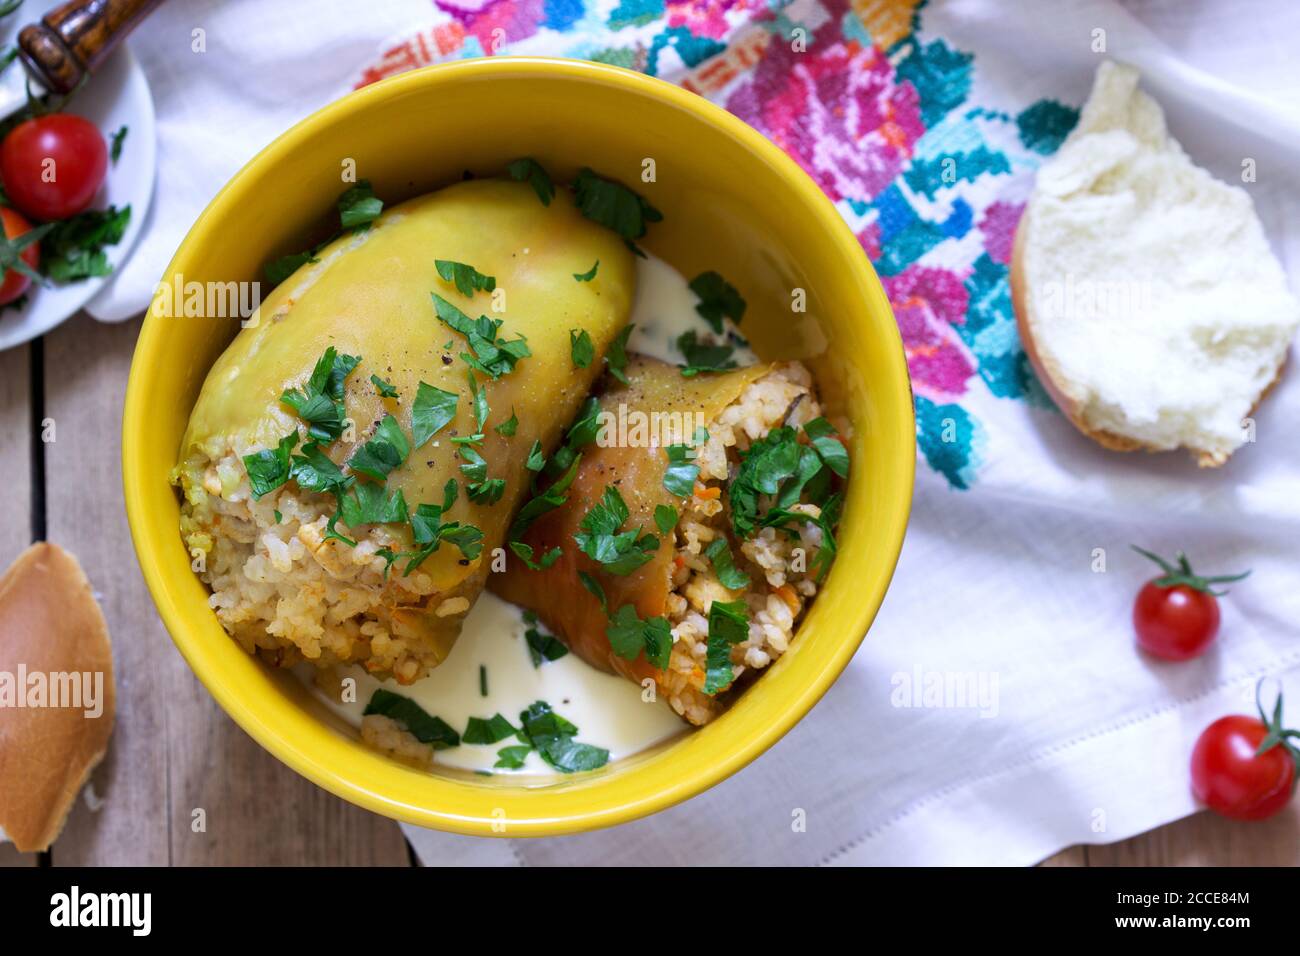 Stuffed peppers served with sour cream and bread, a traditional dish of different nations. Stock Photo